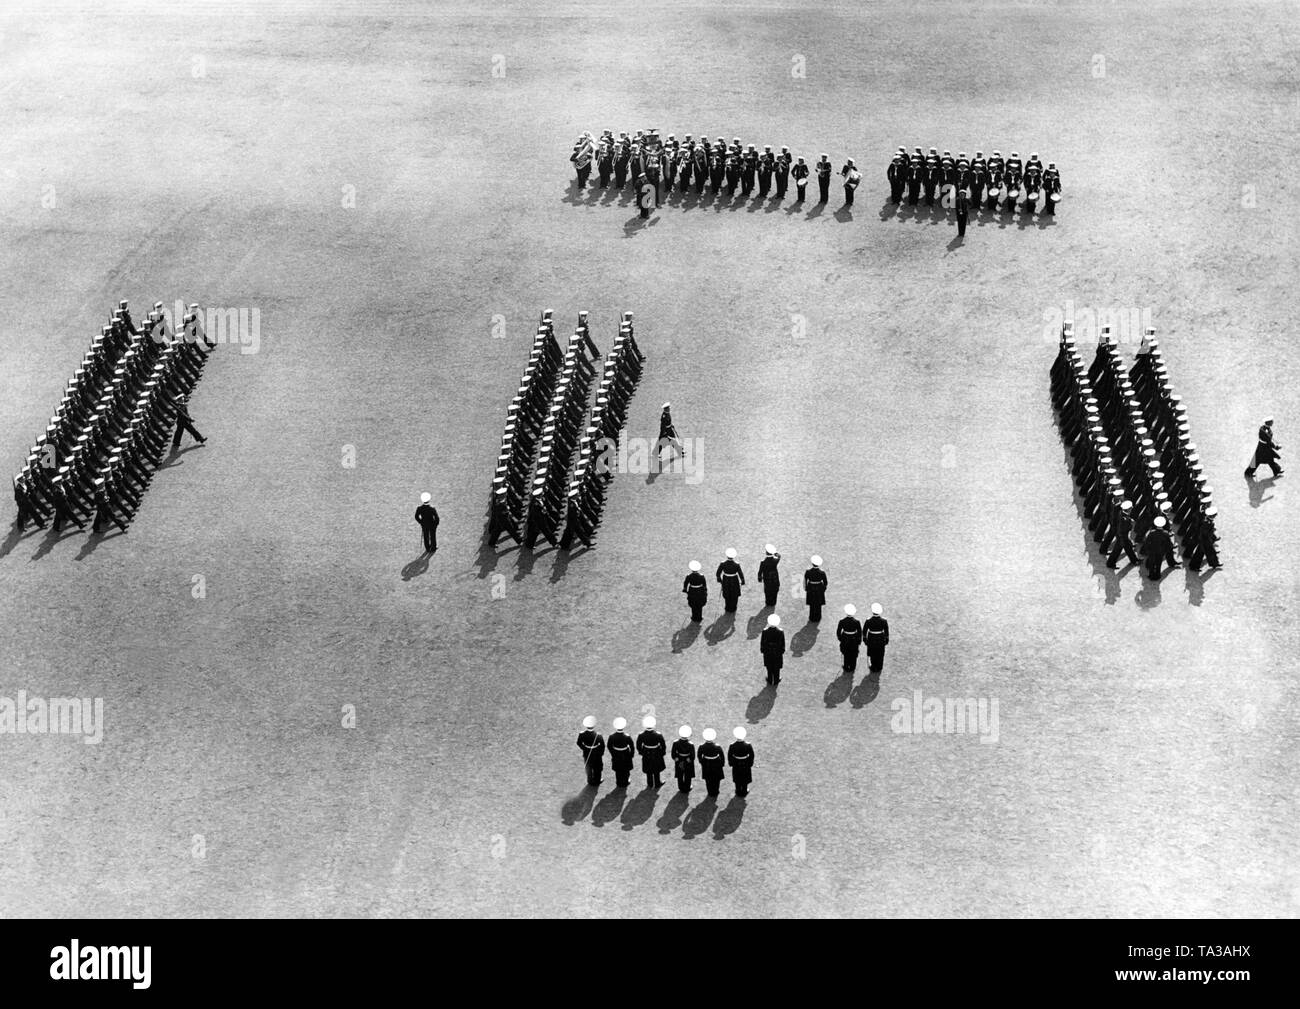 A view from the air on a parade of the Standortgruppe (location group) in Wilhelmshaven in front of Erich Raeder, the Commander-in-Chief of the Kriegsmarine. Stock Photo